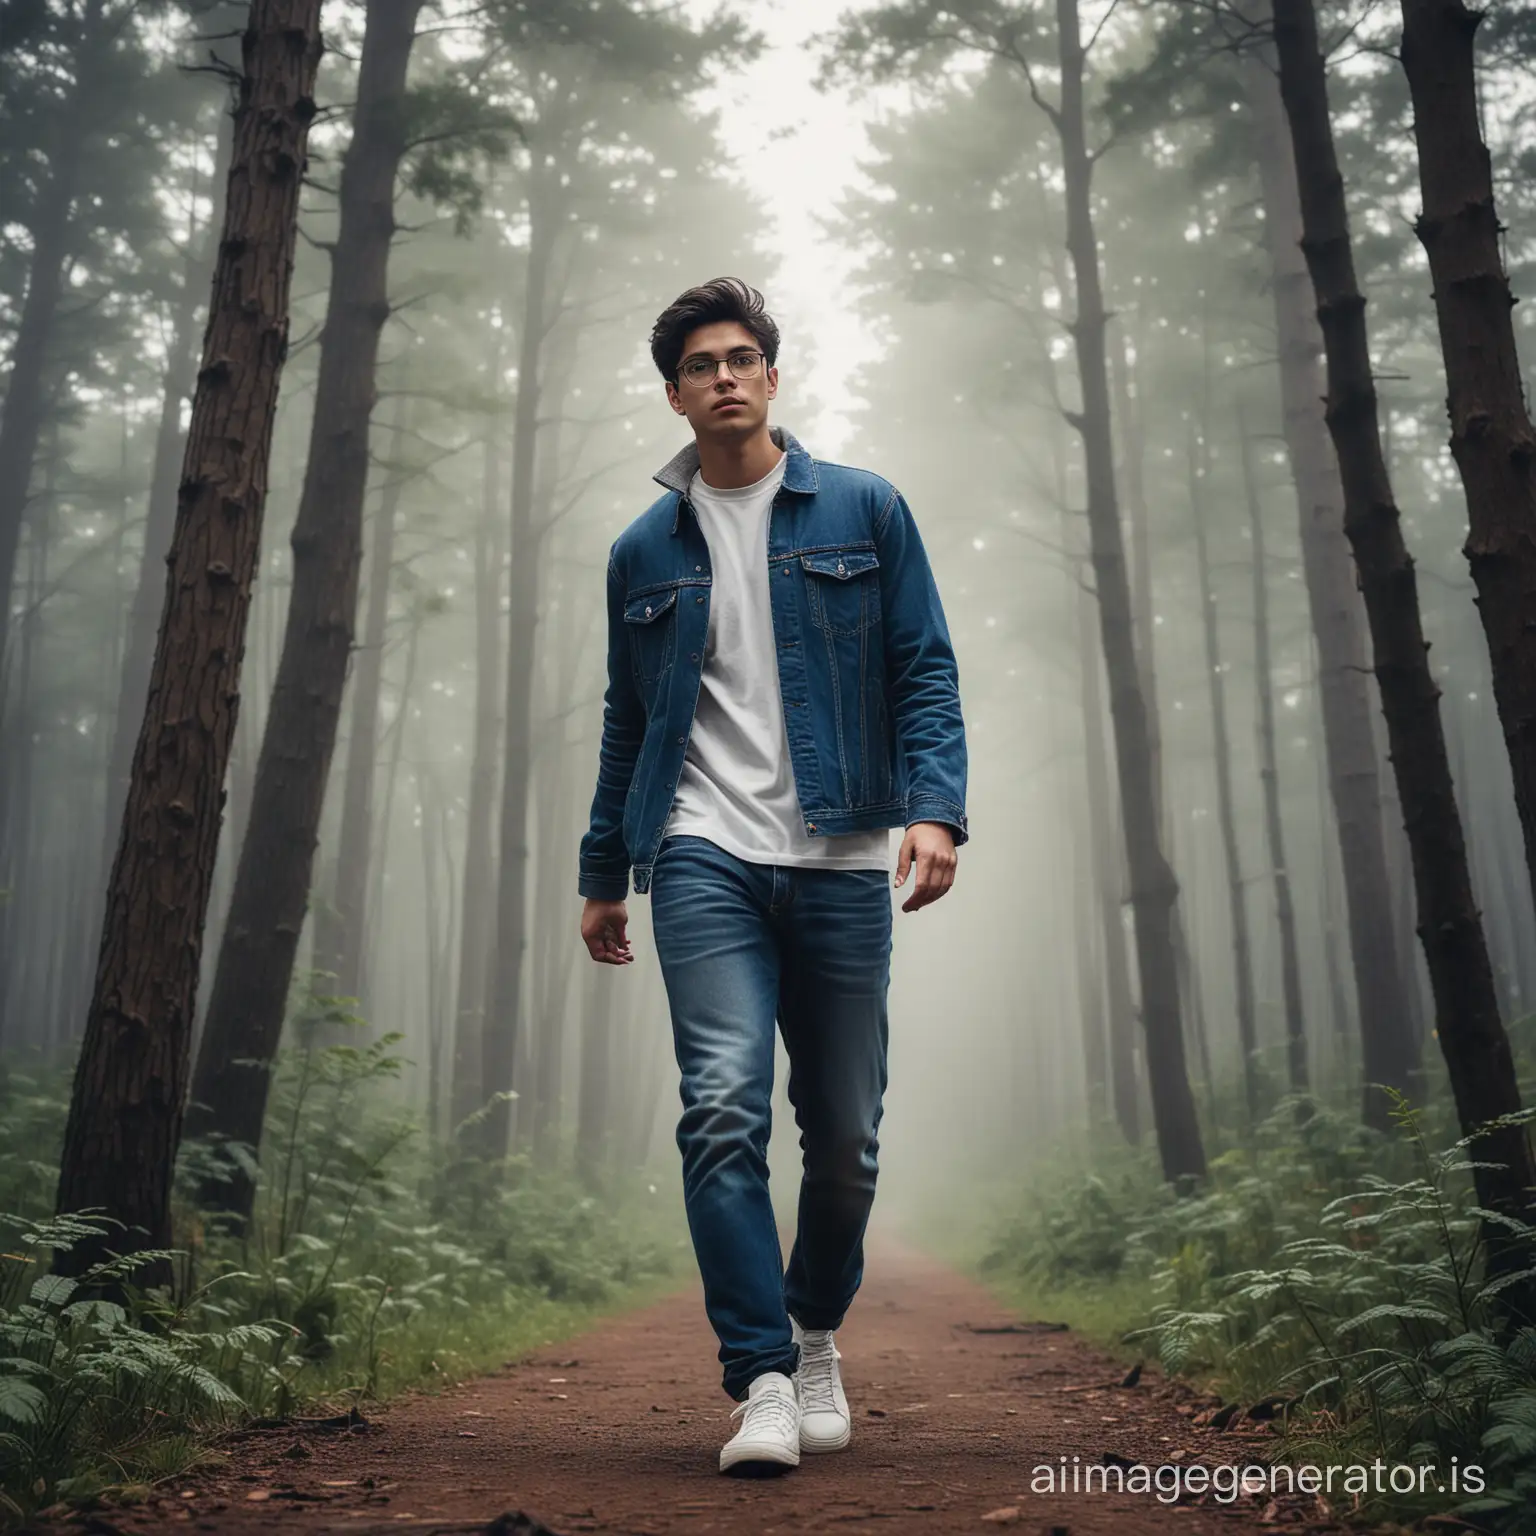 Handsome-20YearOld-Man-in-Denim-and-White-Sneakers-Strolling-Through-Misty-Forest